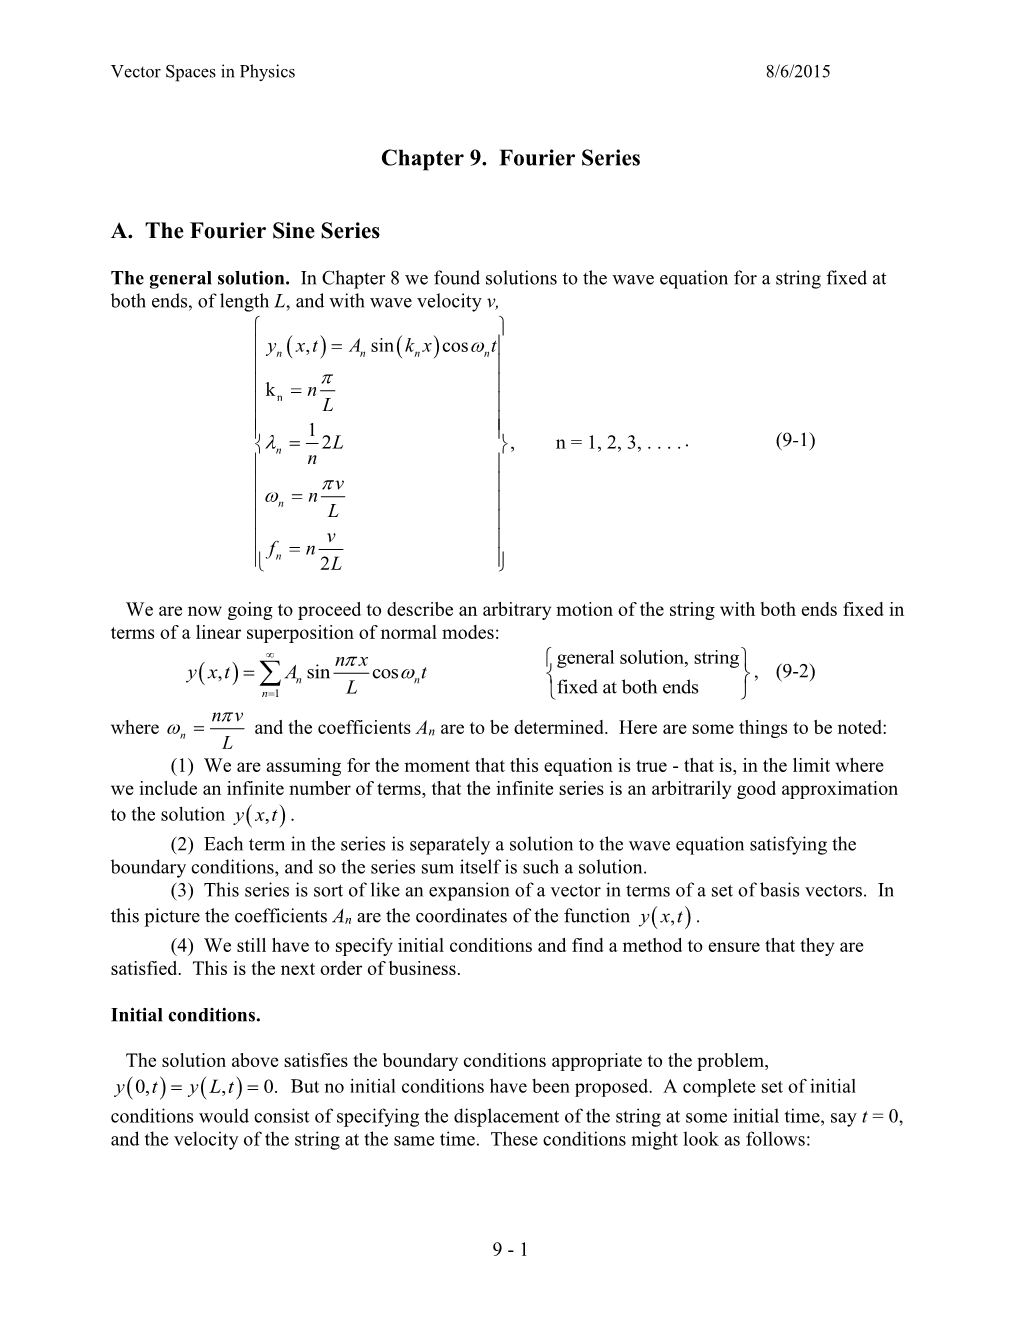 Chapter 9. Fourier Series A. the Fourier Sine Series